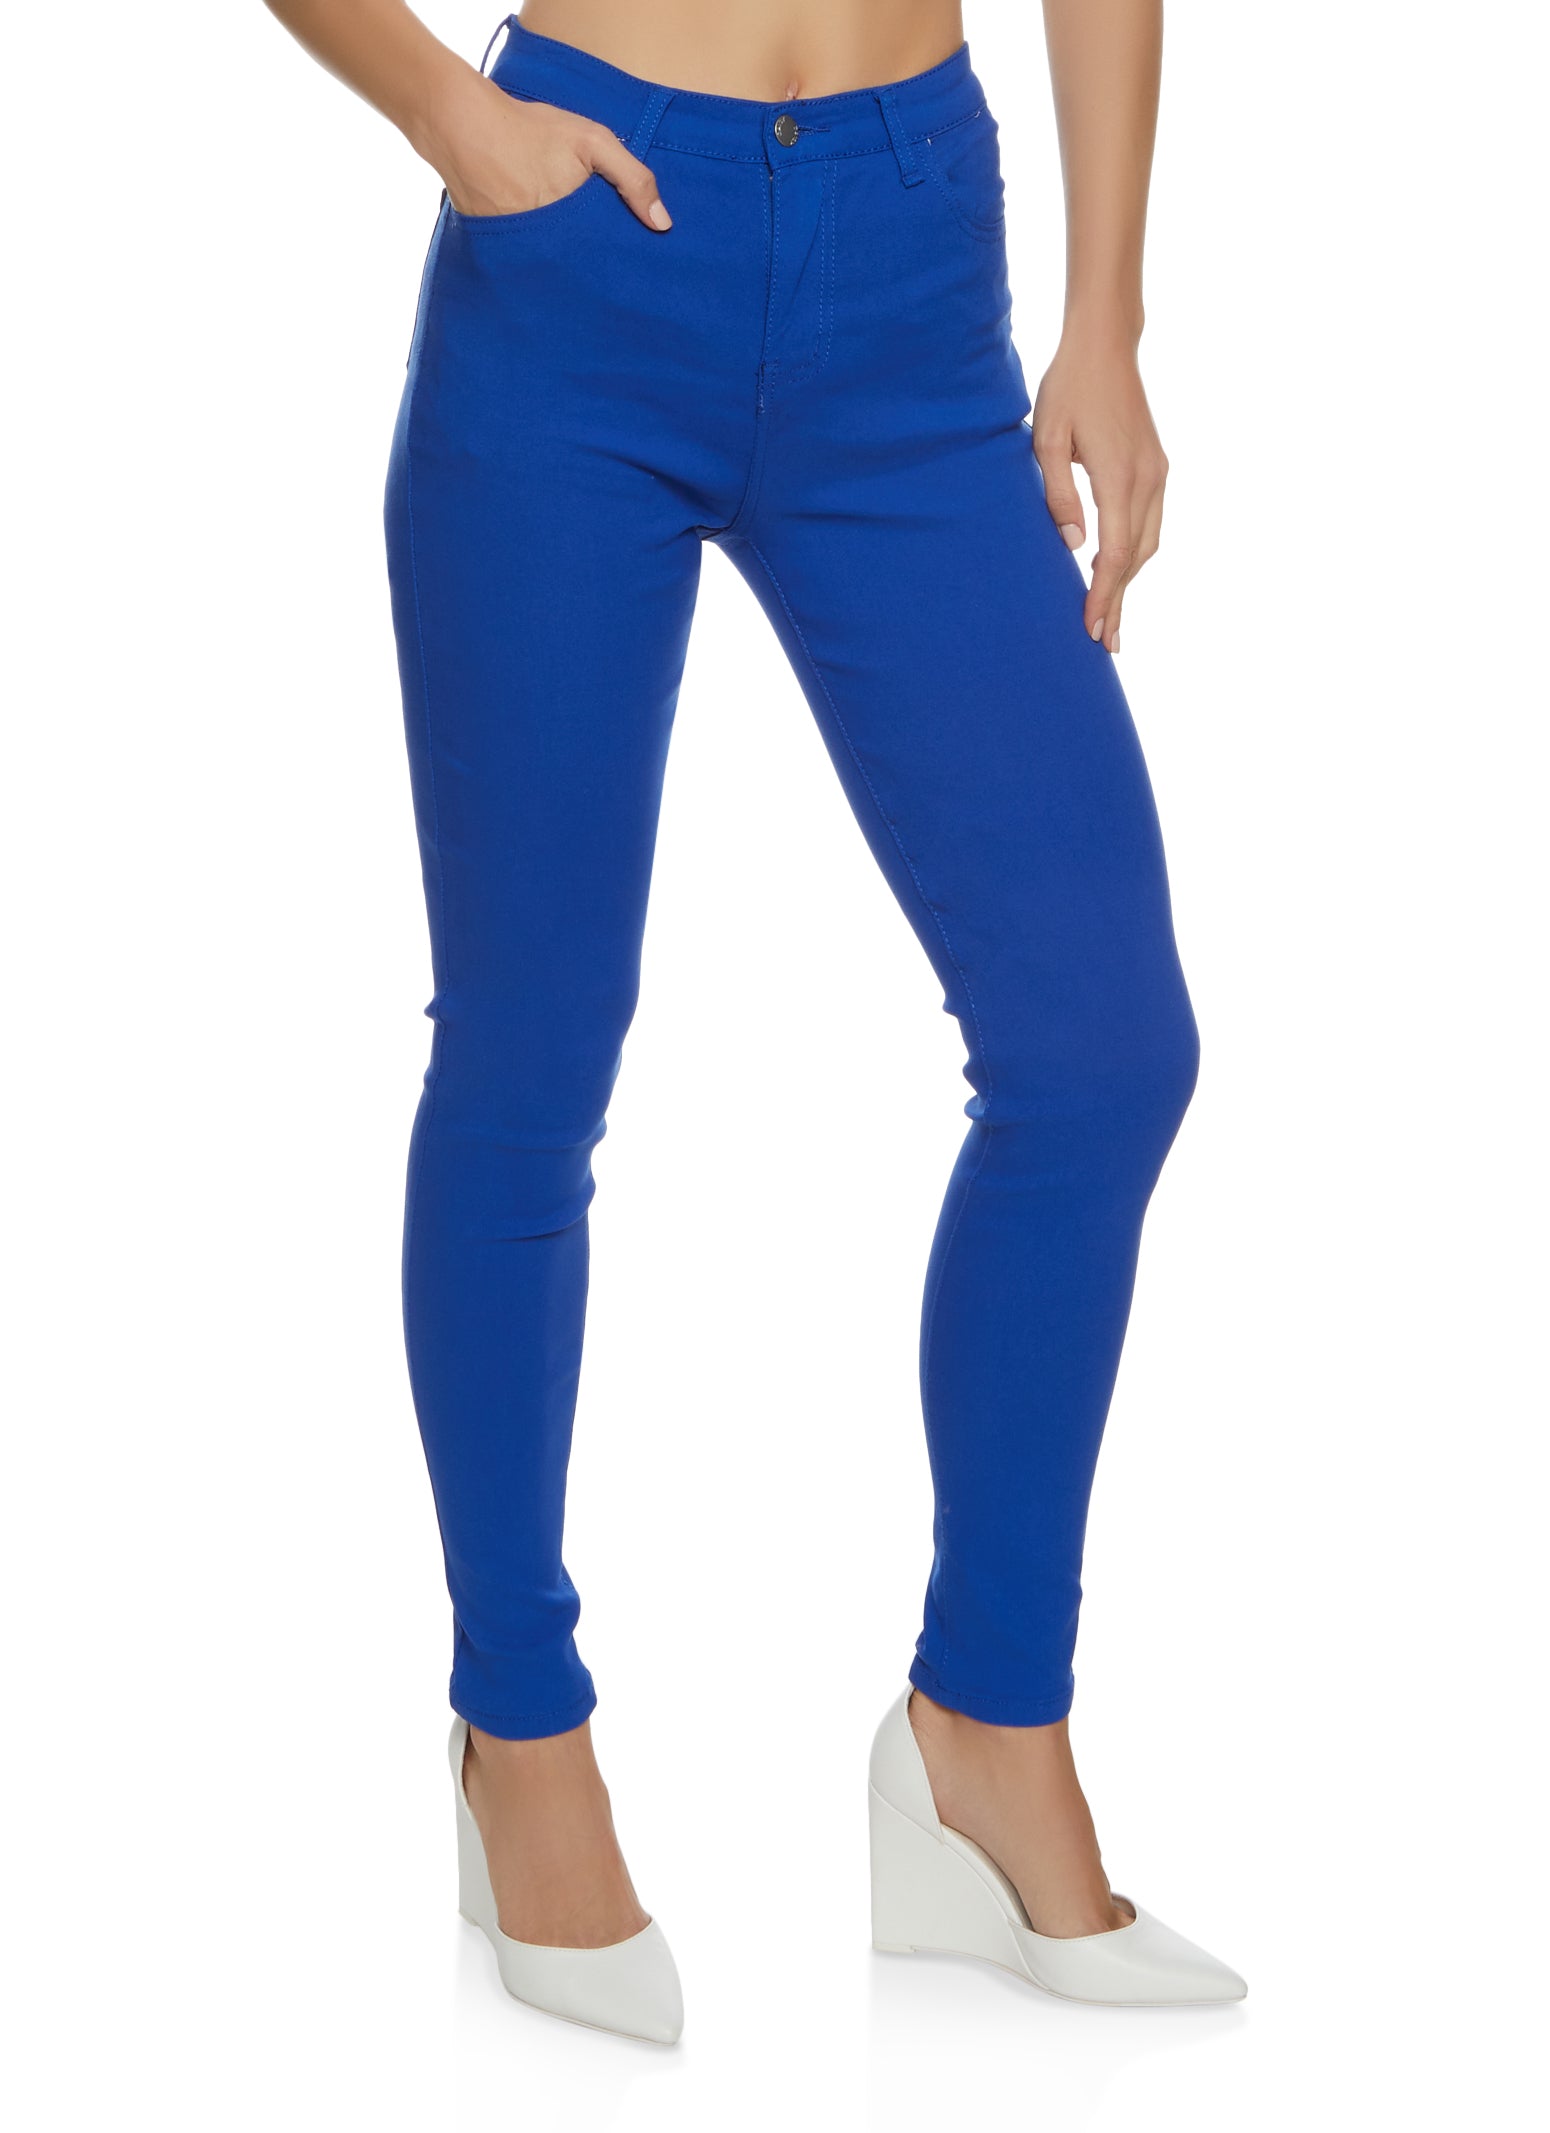 High Waisted Royal Blue Color Distressed Skinny Jeans – Best You